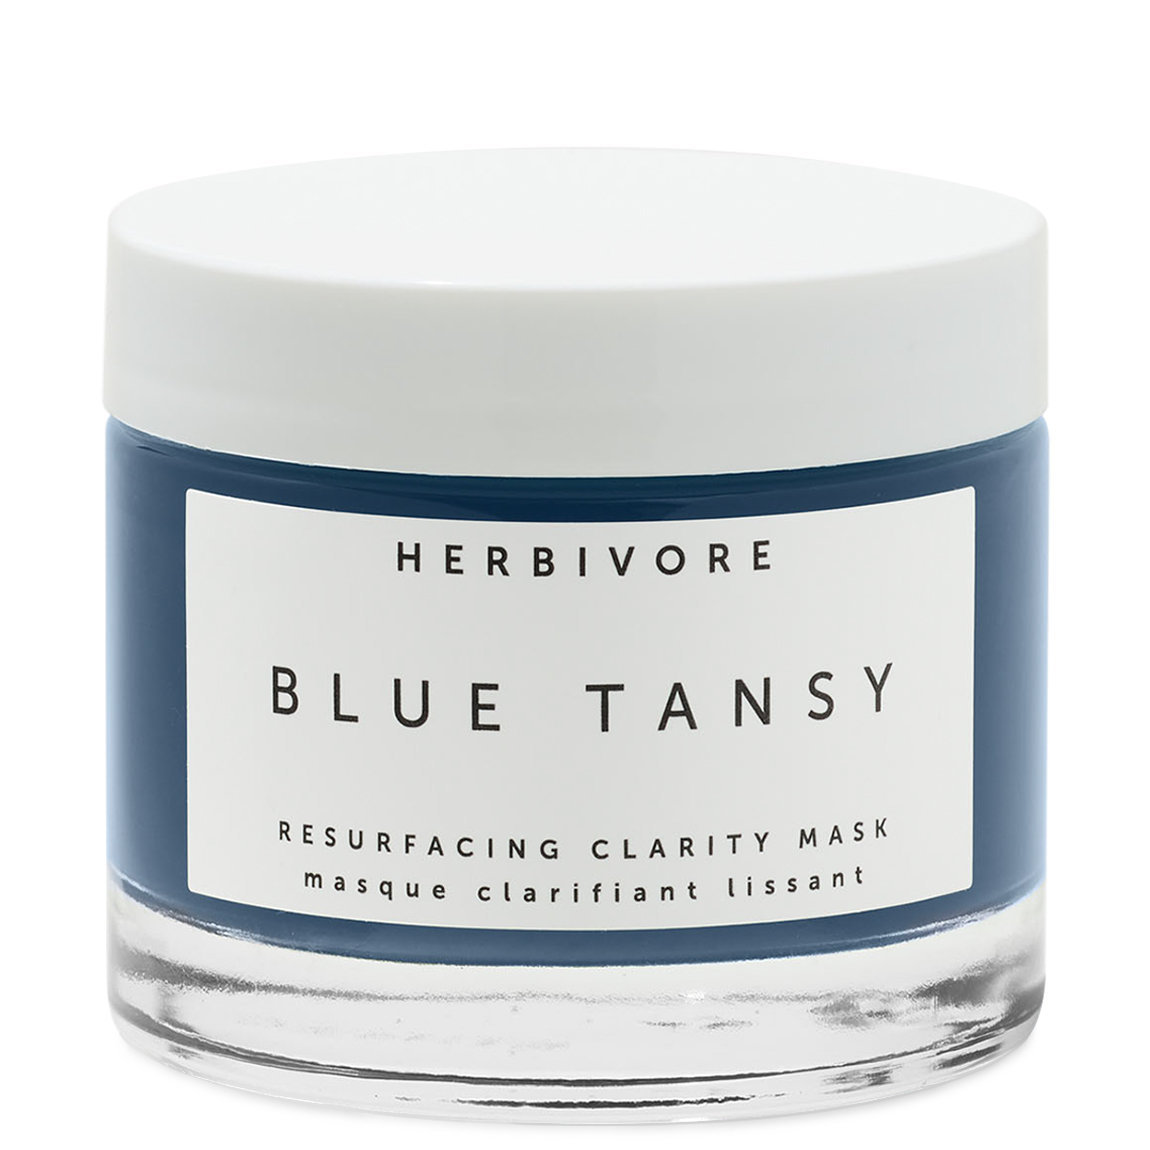 Herbivore Blue Tansy Invisible Pores Resurfacing Clarity Mask alternative view 1 - product swatch.